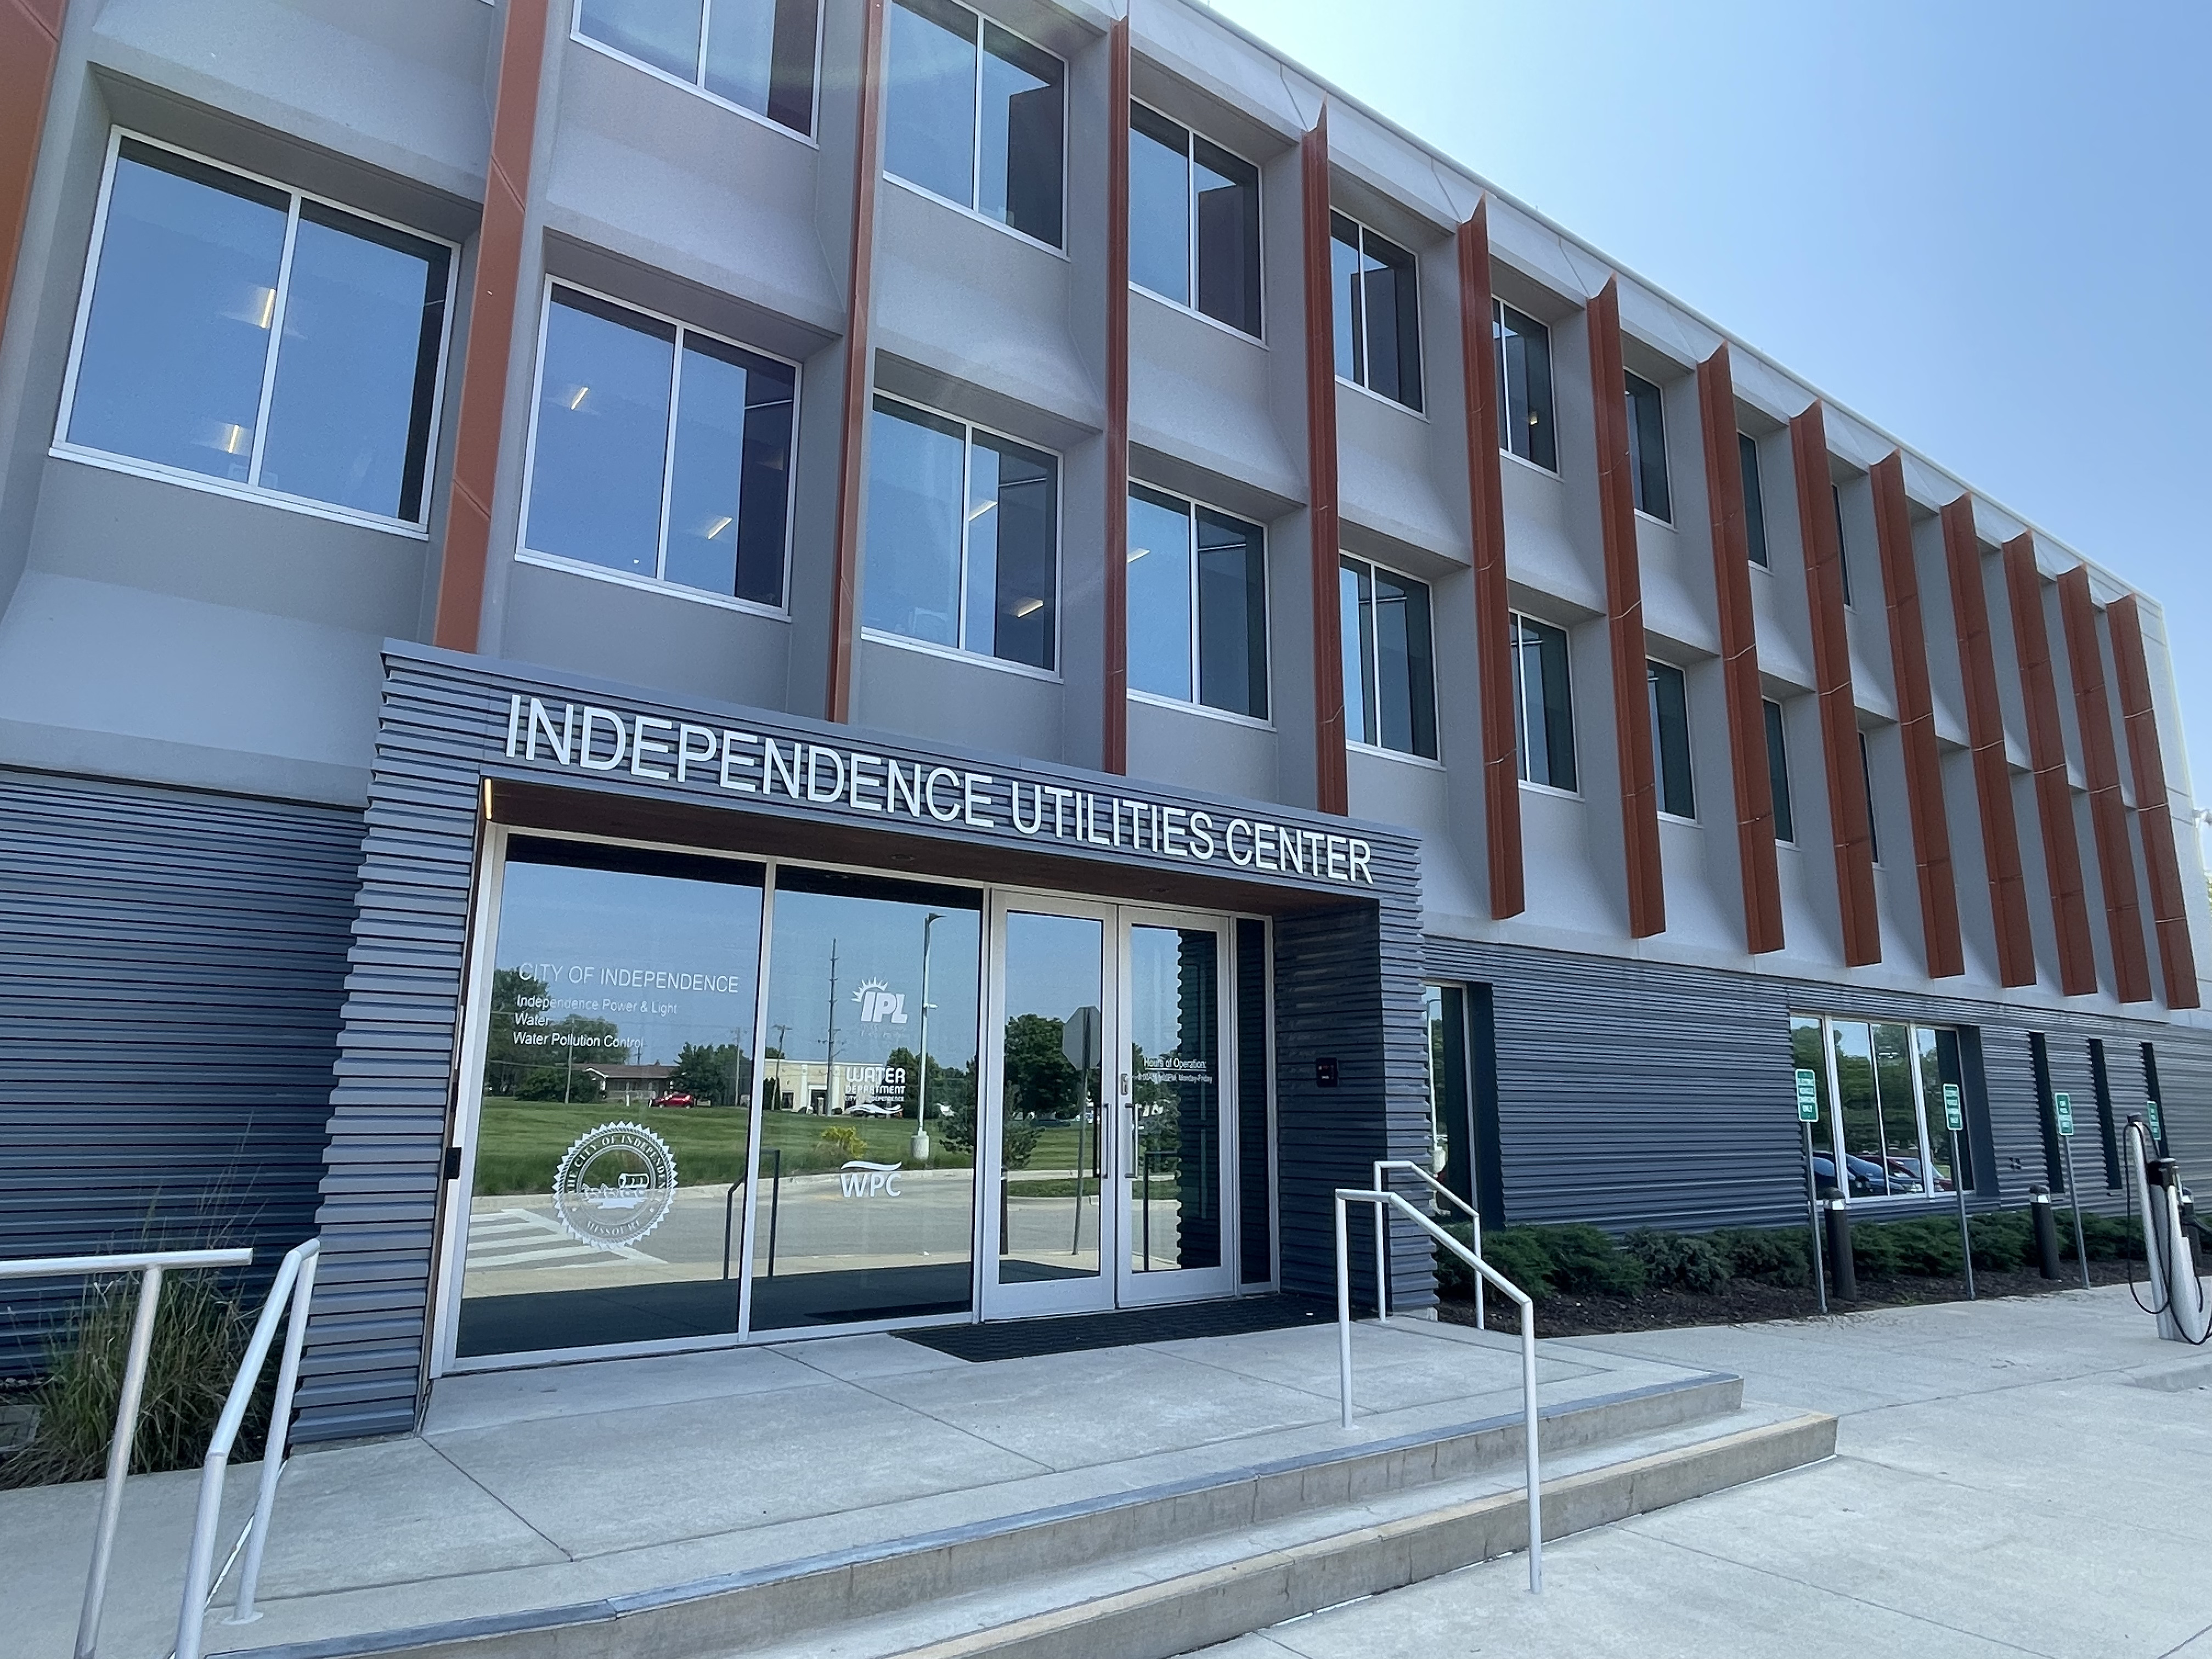 The outside of the Independence Utilities Center on a bright sunny day. The sun is reflecting off the glass doors